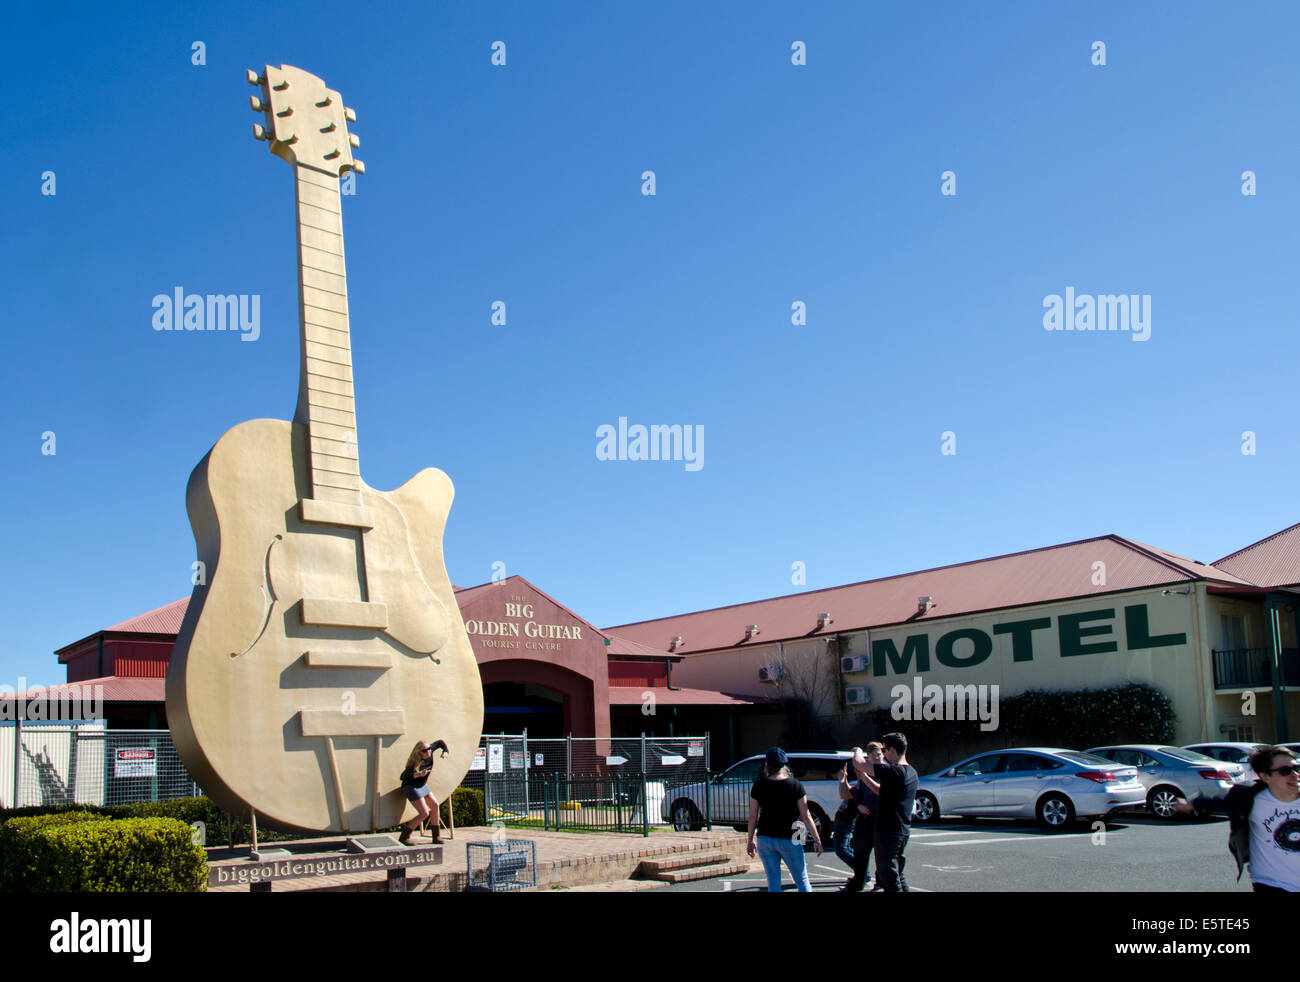 Tourists posing in front of the Big Golden Guitar, Tamworth Australia Stock Photo